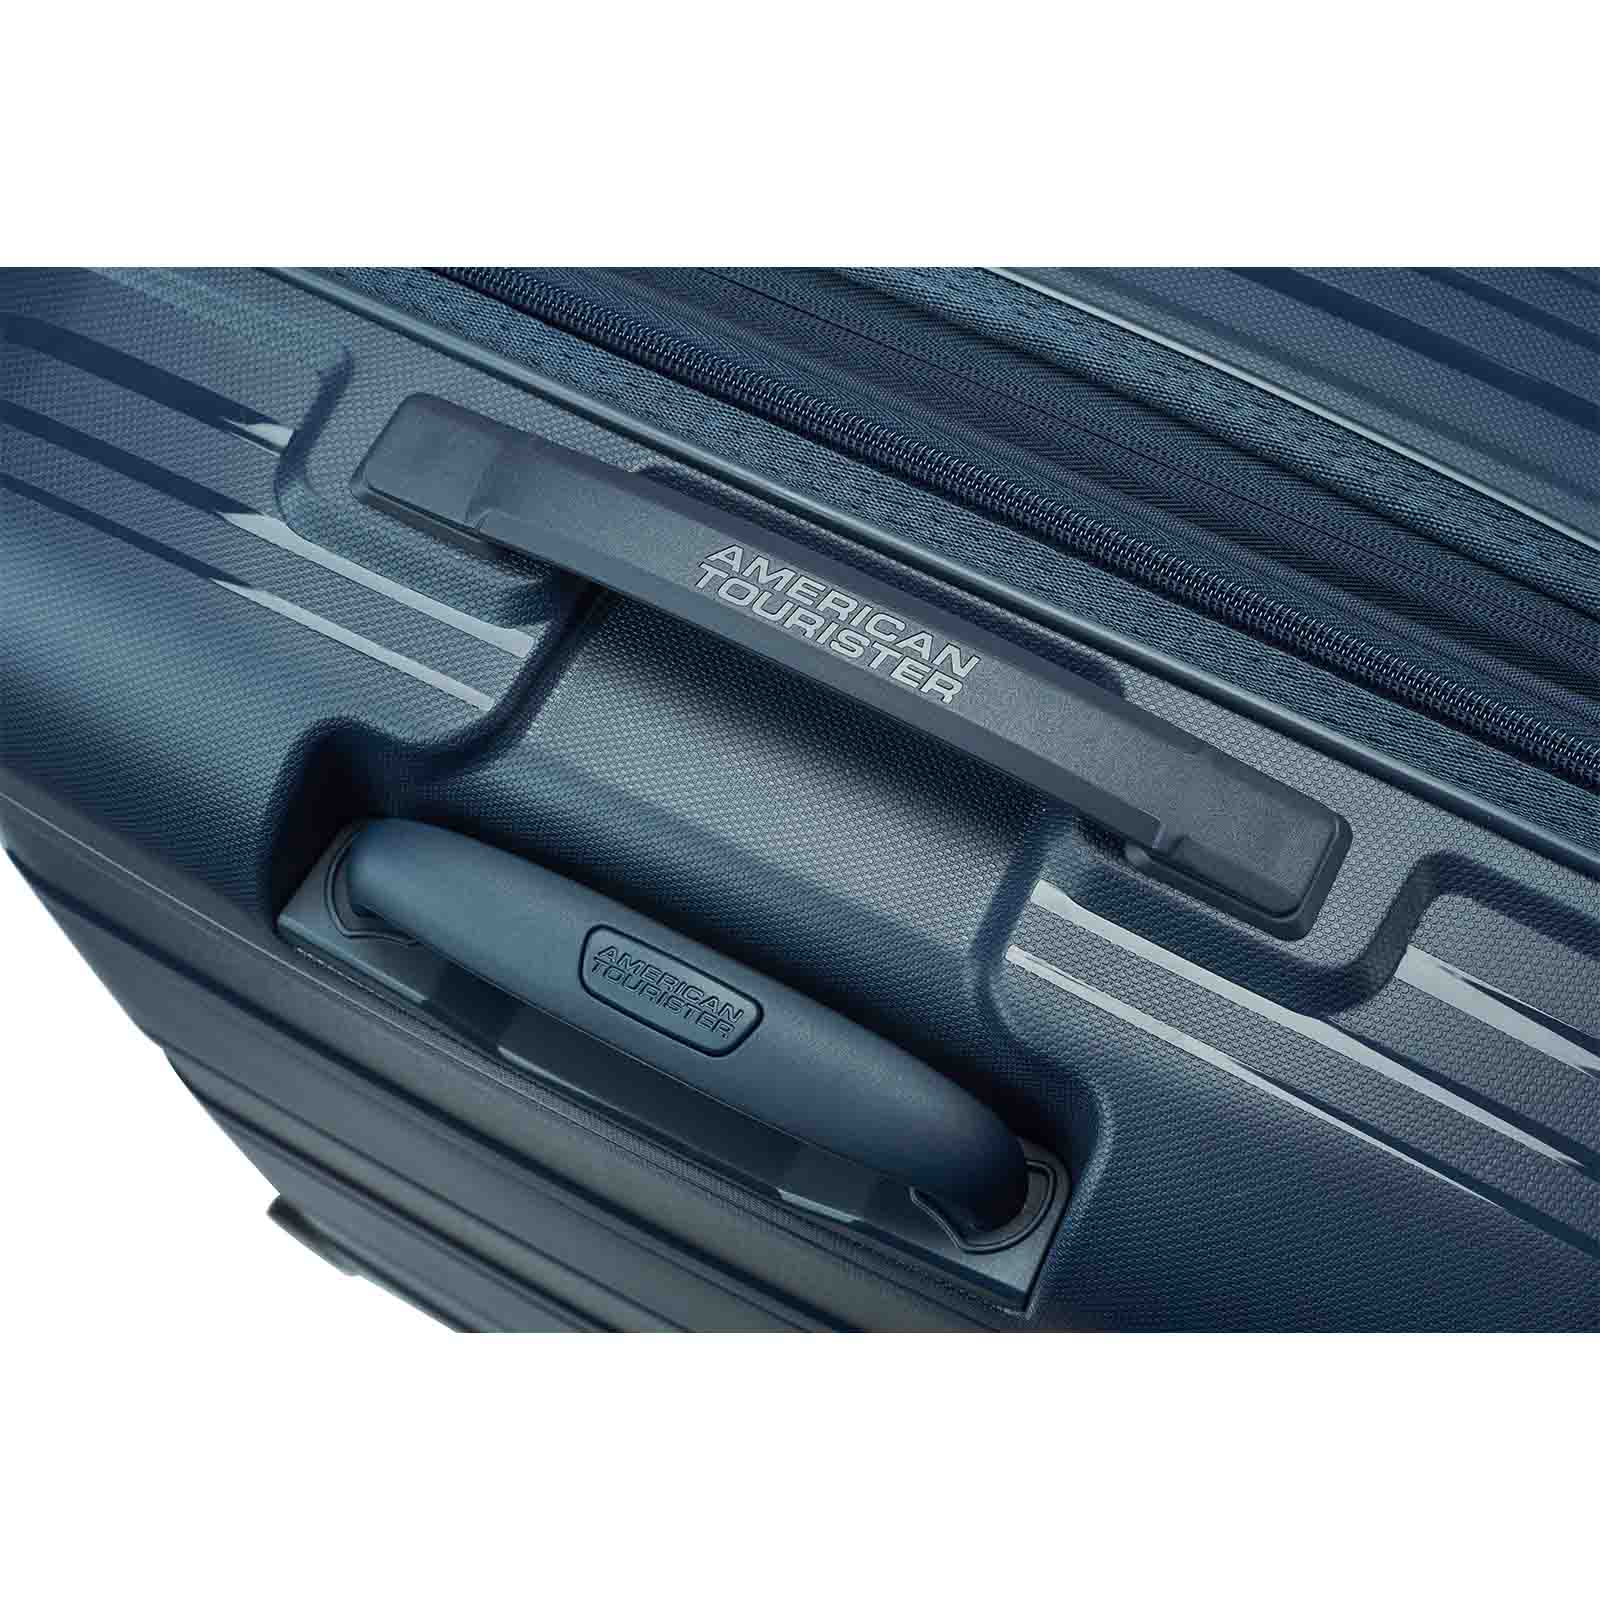 American-Tourister-Light-Max-69cm-Suitcase-Navy-Trolley